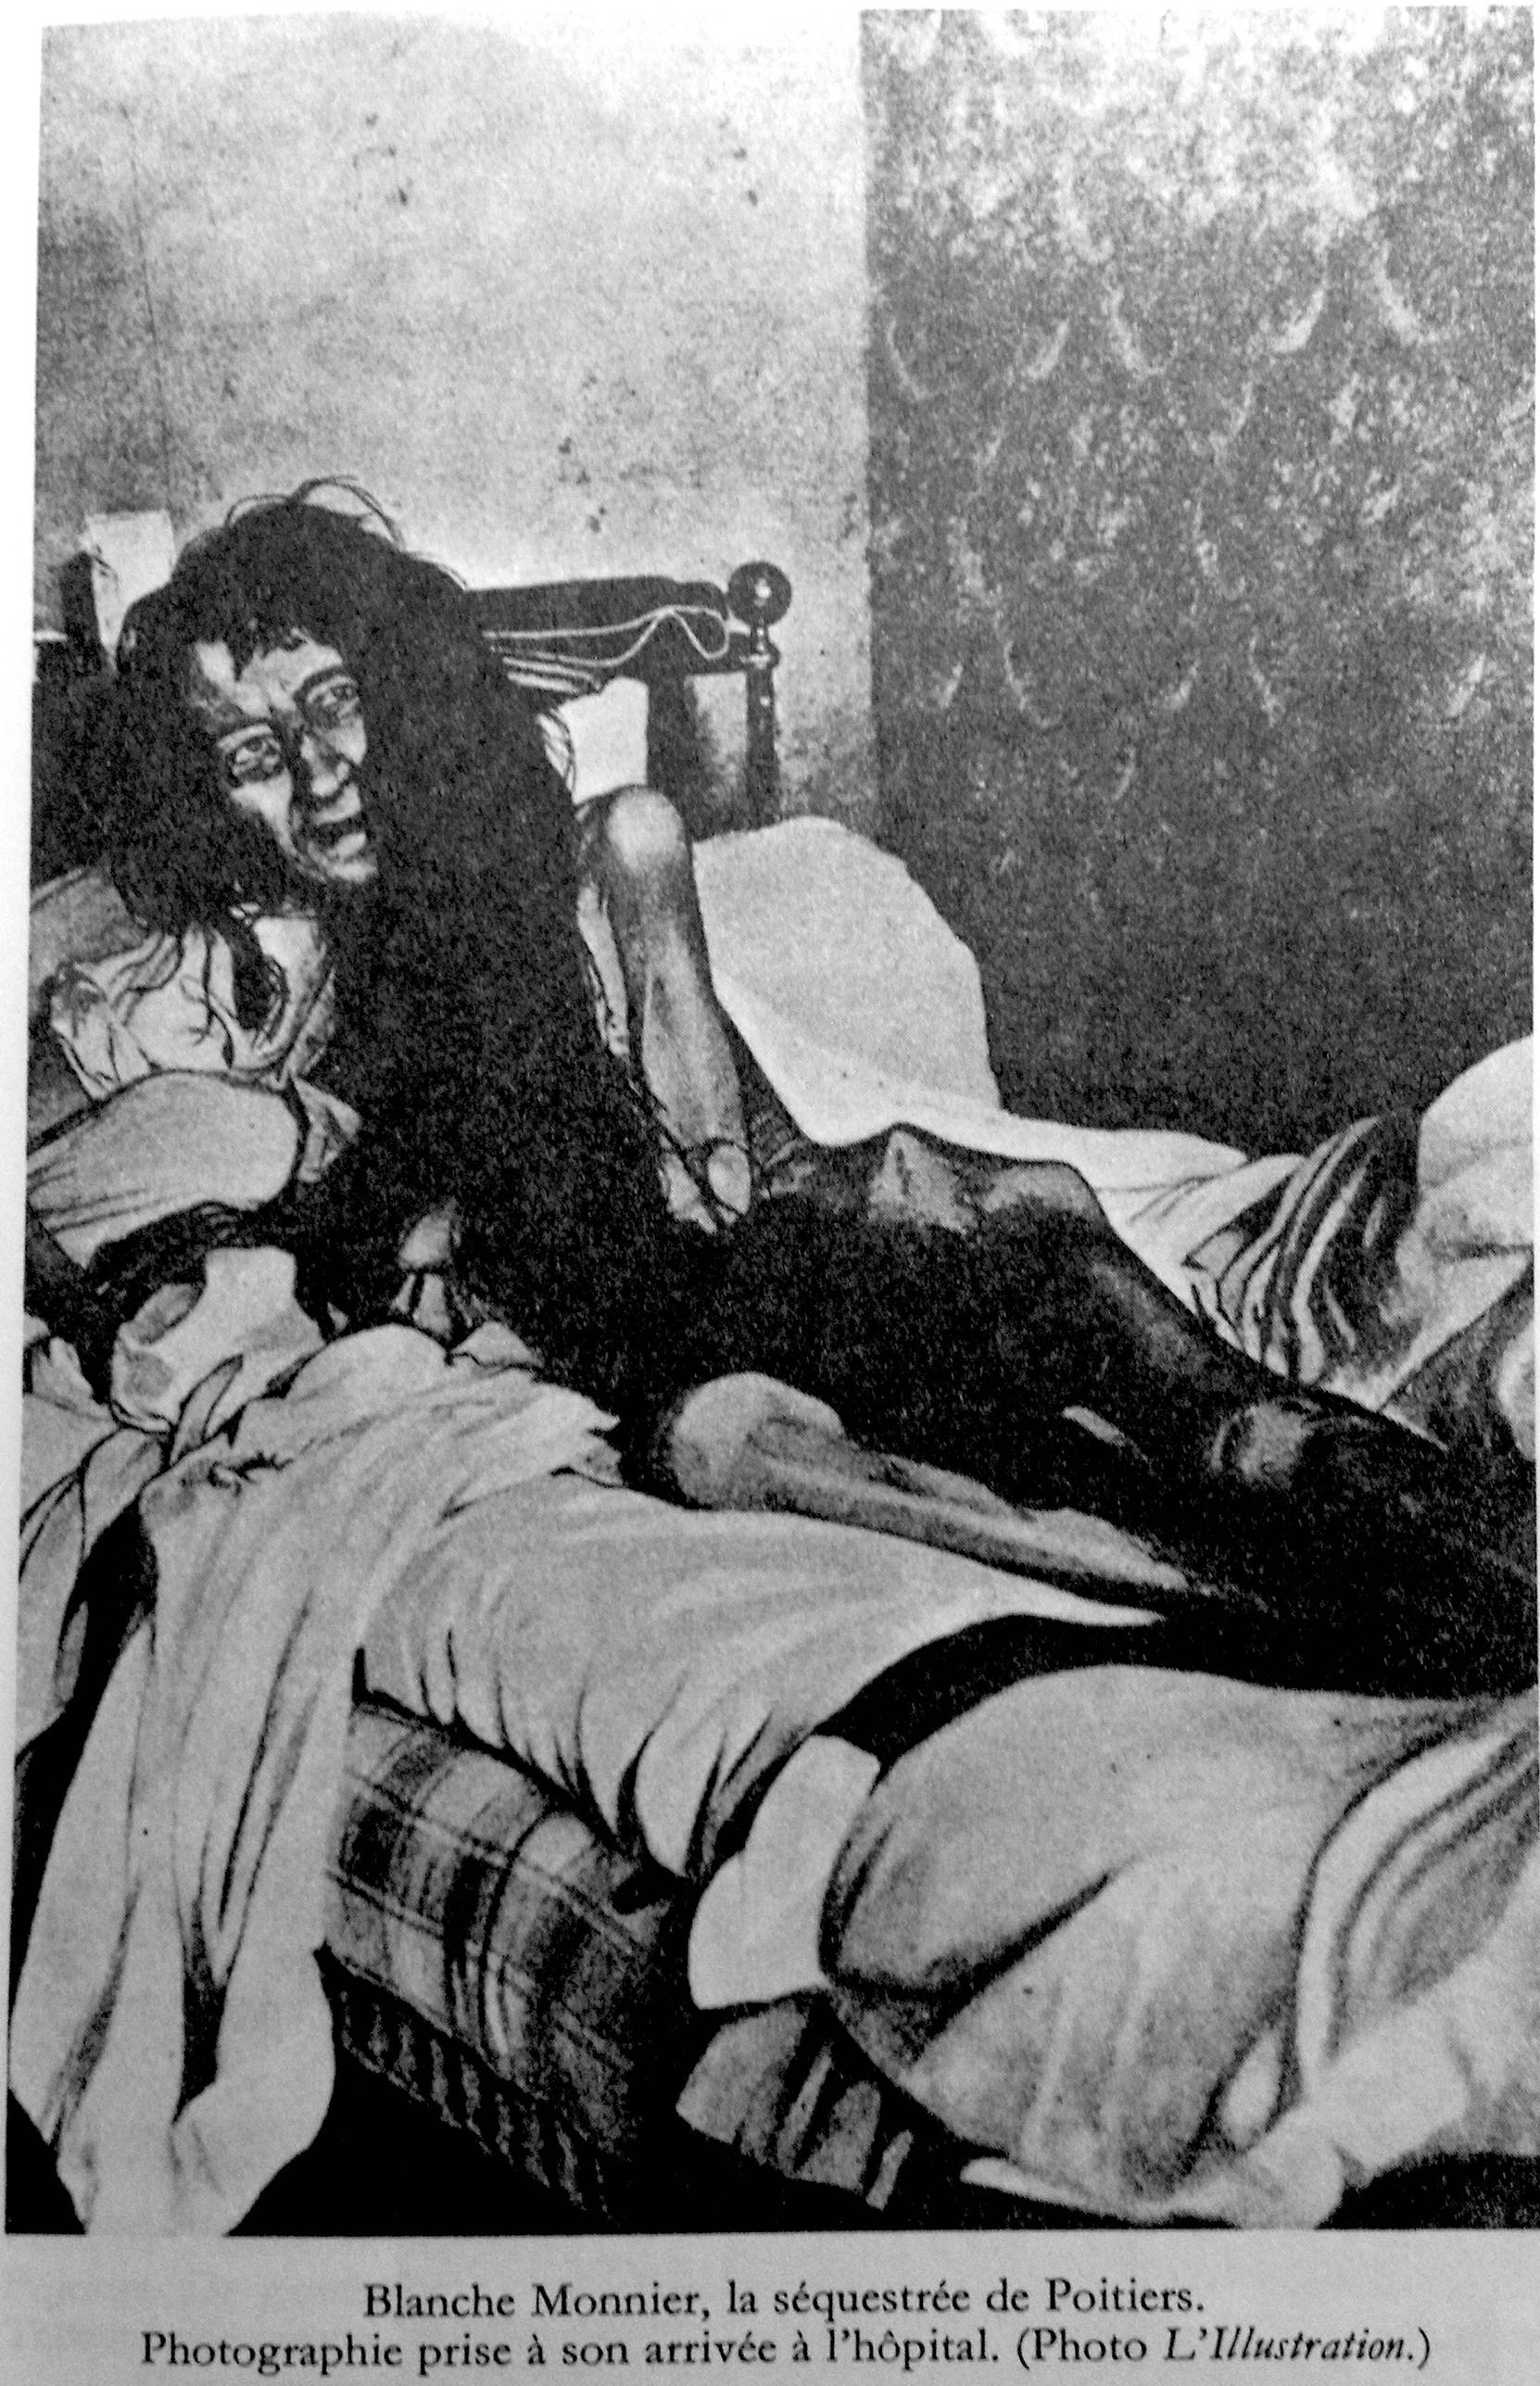 In 1901, in France, a woman was found in weak health after having been confined in a room during 24 years by her mother. This is a picture of when they freed her.